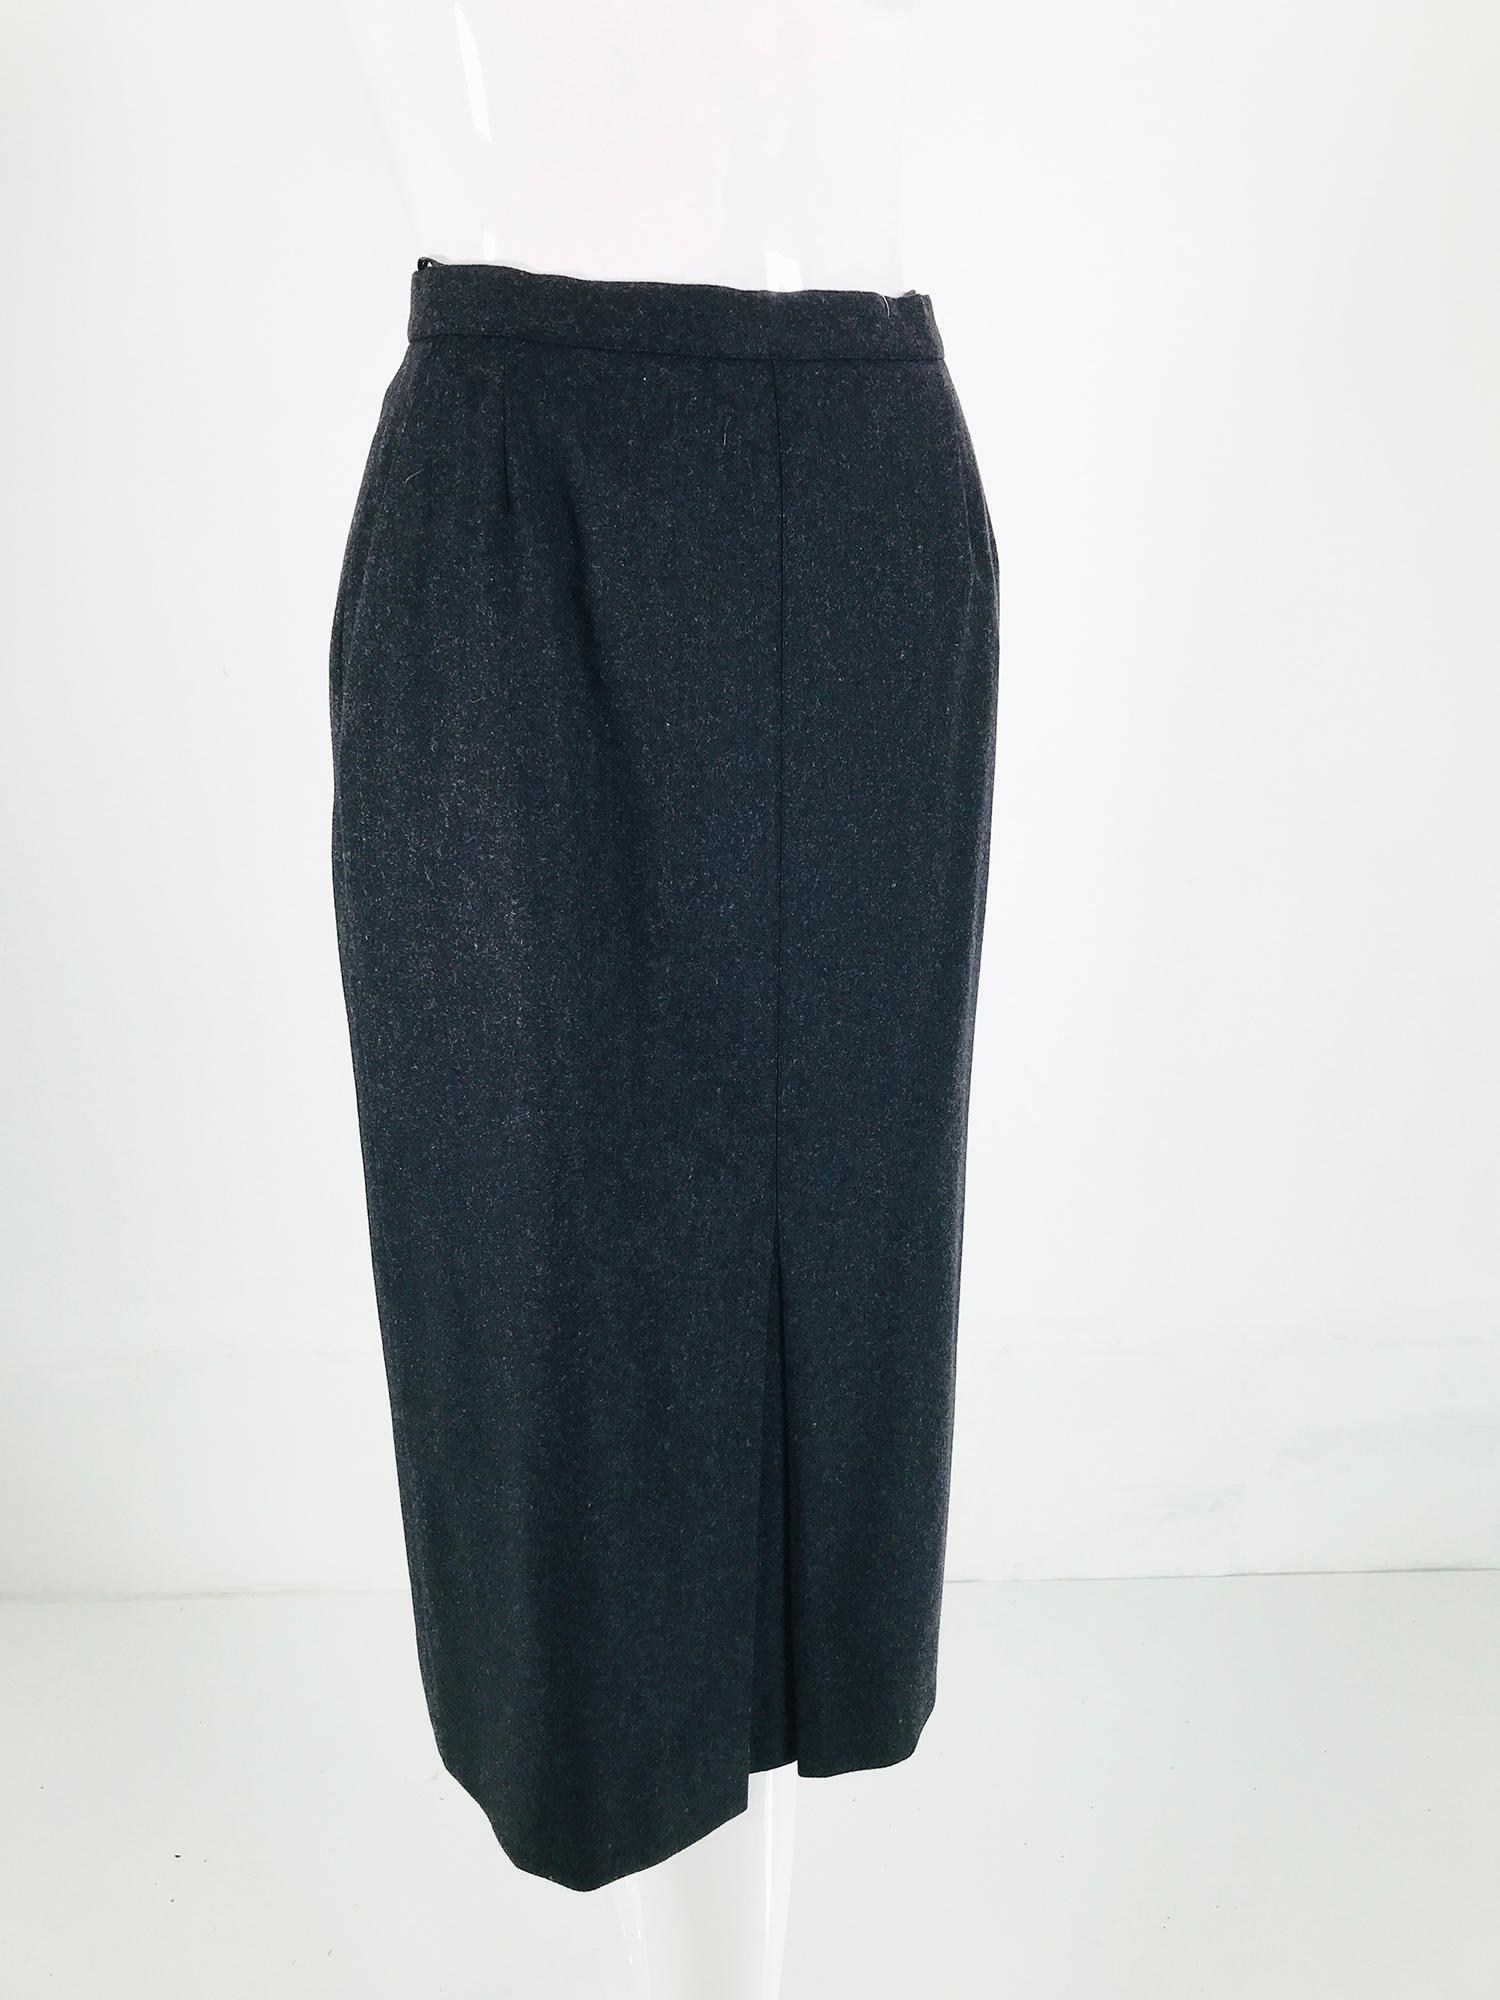 Chanel charcoal wool kick pleat front, curved hip front pocket, pencil skirt. 1990s dark charcoal wool skirt has a narrow band waist, the skirt closes at the side with a bar hook at the waist and a gold Chanel button & button hole, side zipper